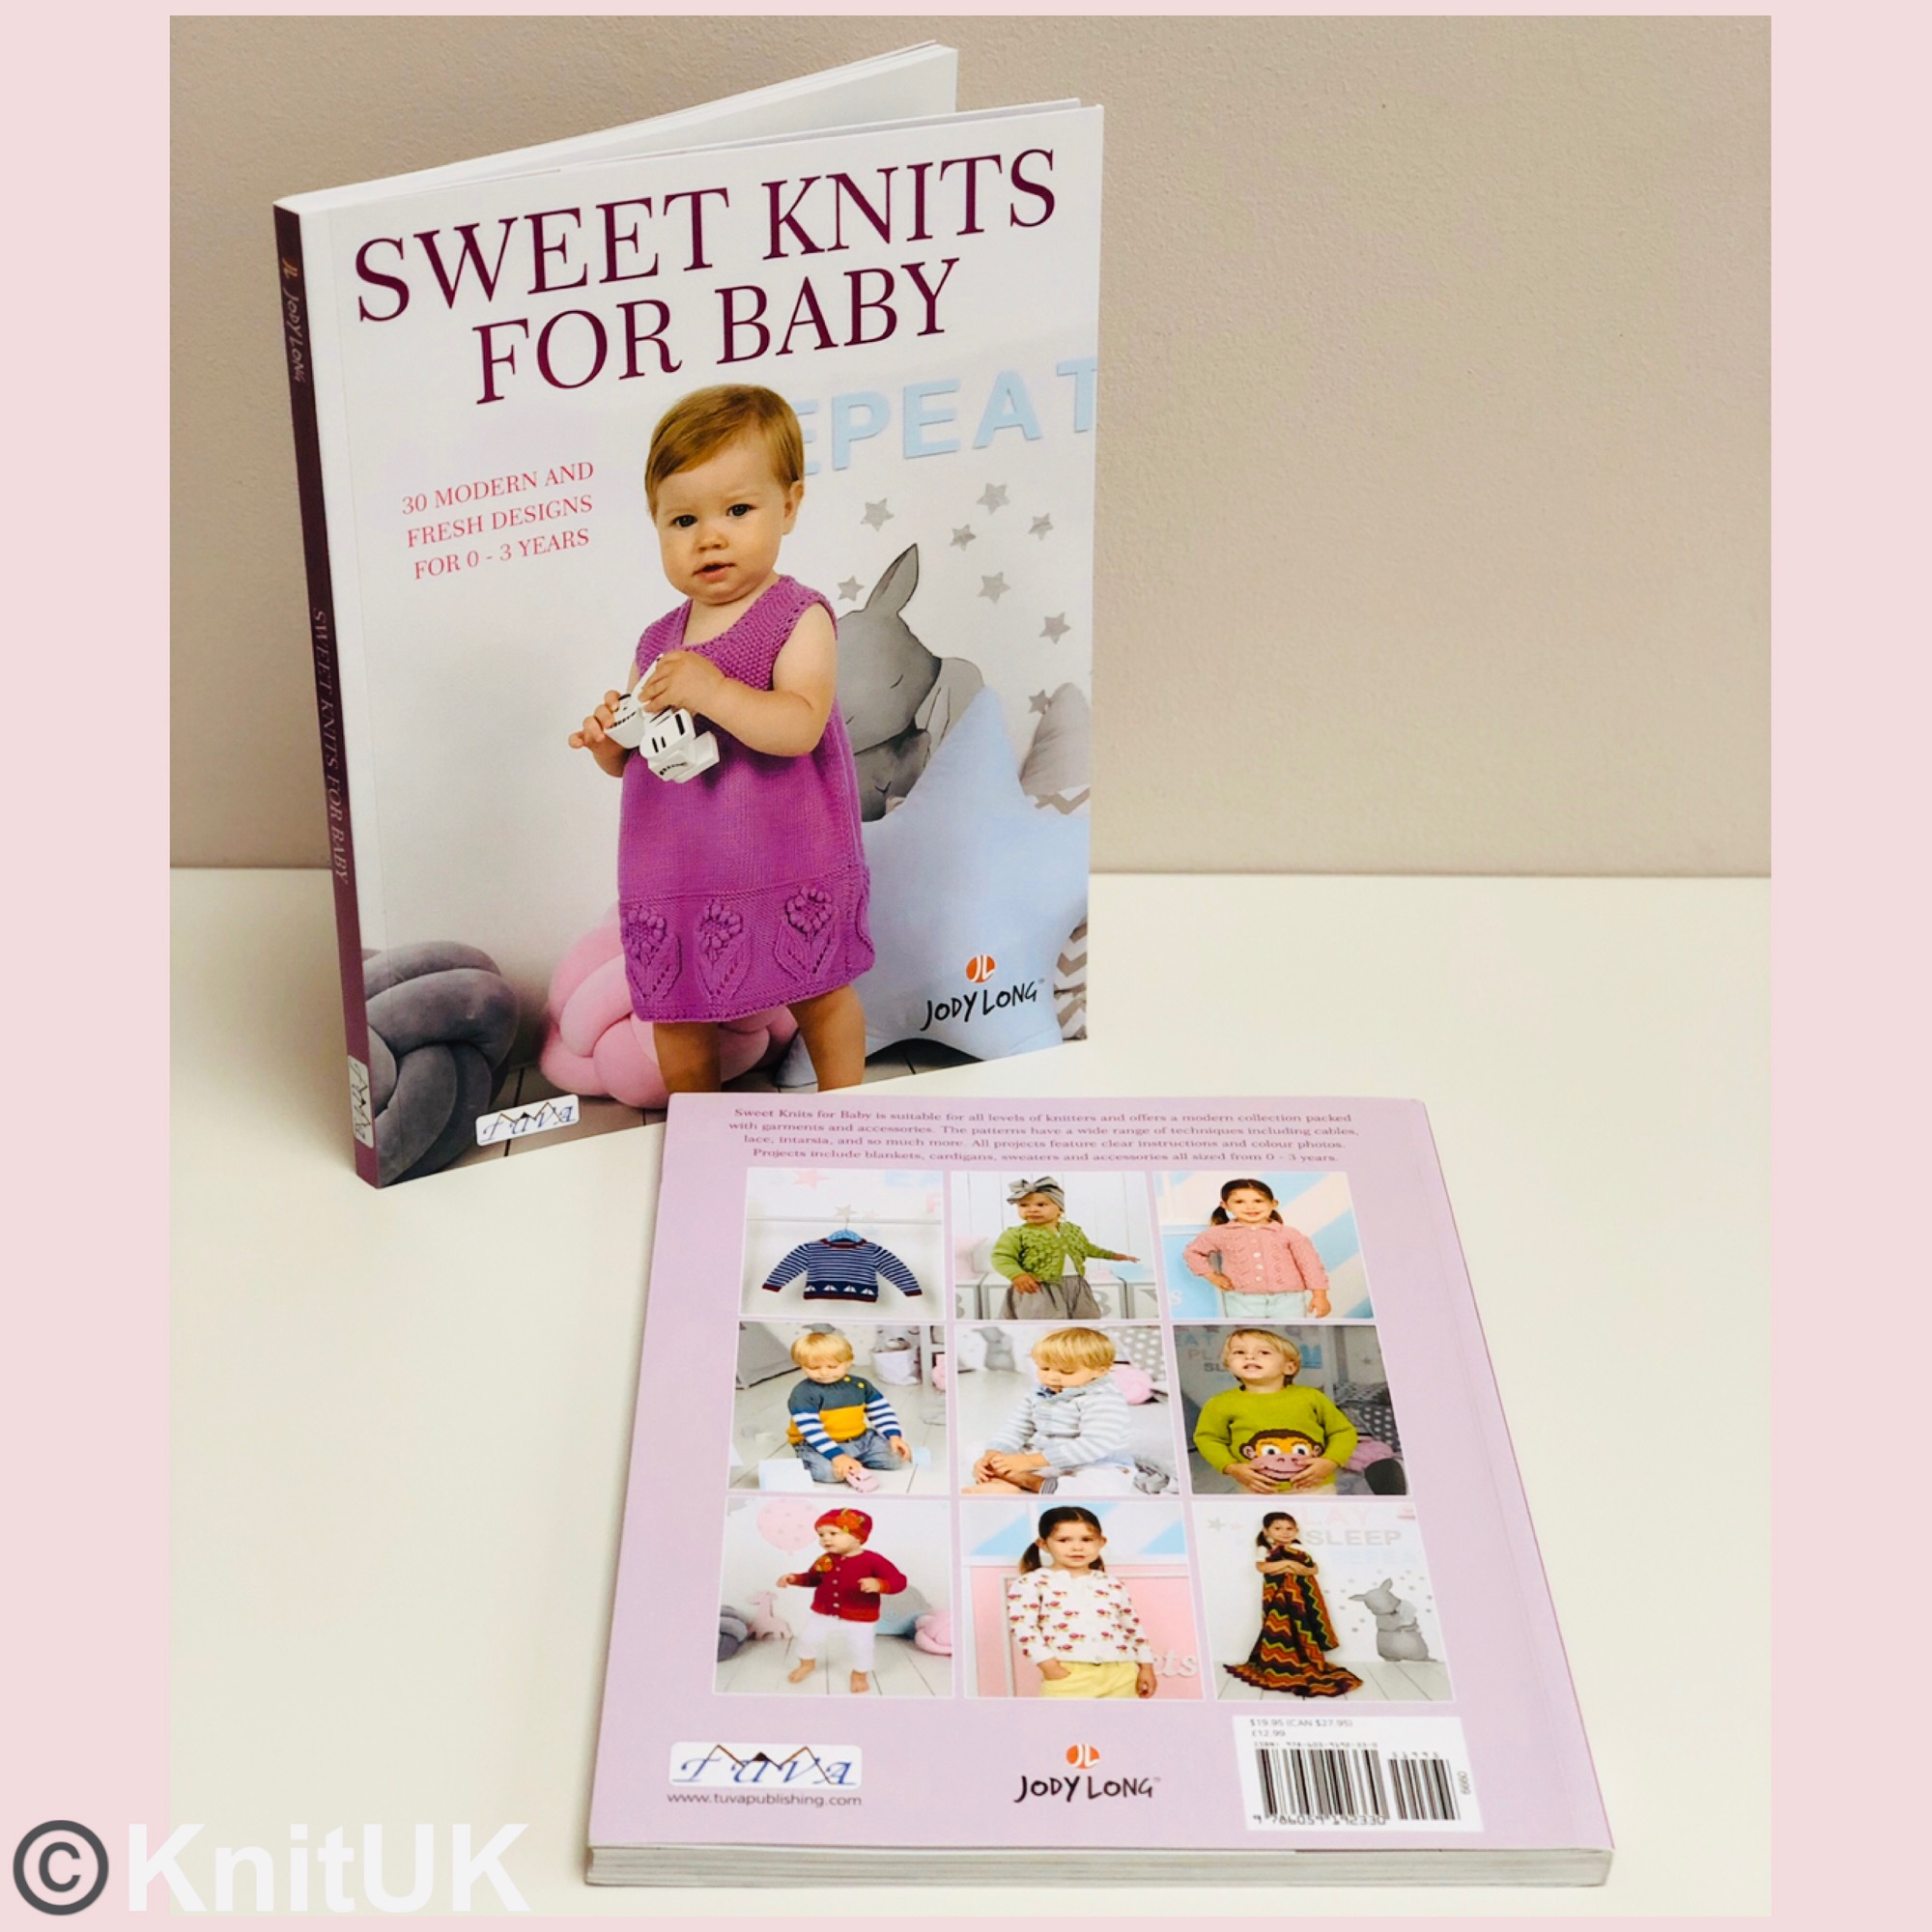 Tuva book sweet knits for baby jody long front back cover